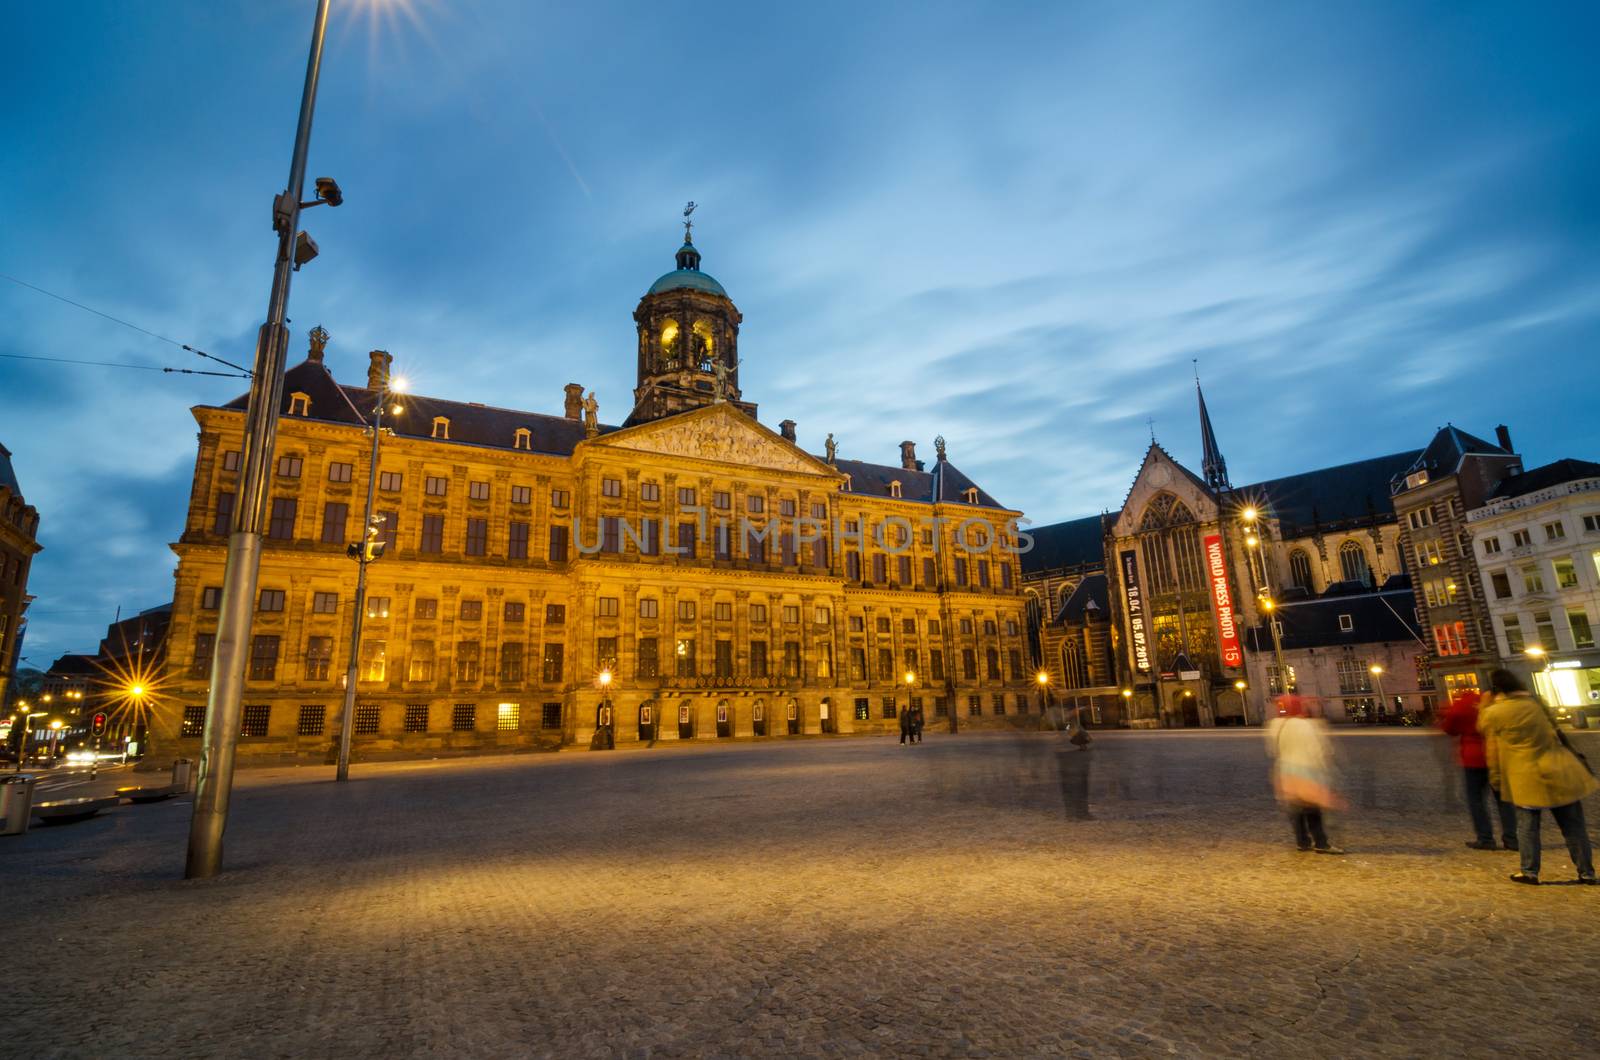 Amsterdam, Netherlands - May 7, 2015: Tourist visit Dam Square with a view of the Royal Palace and the Nieuwe Kerk in Amsterdam by siraanamwong